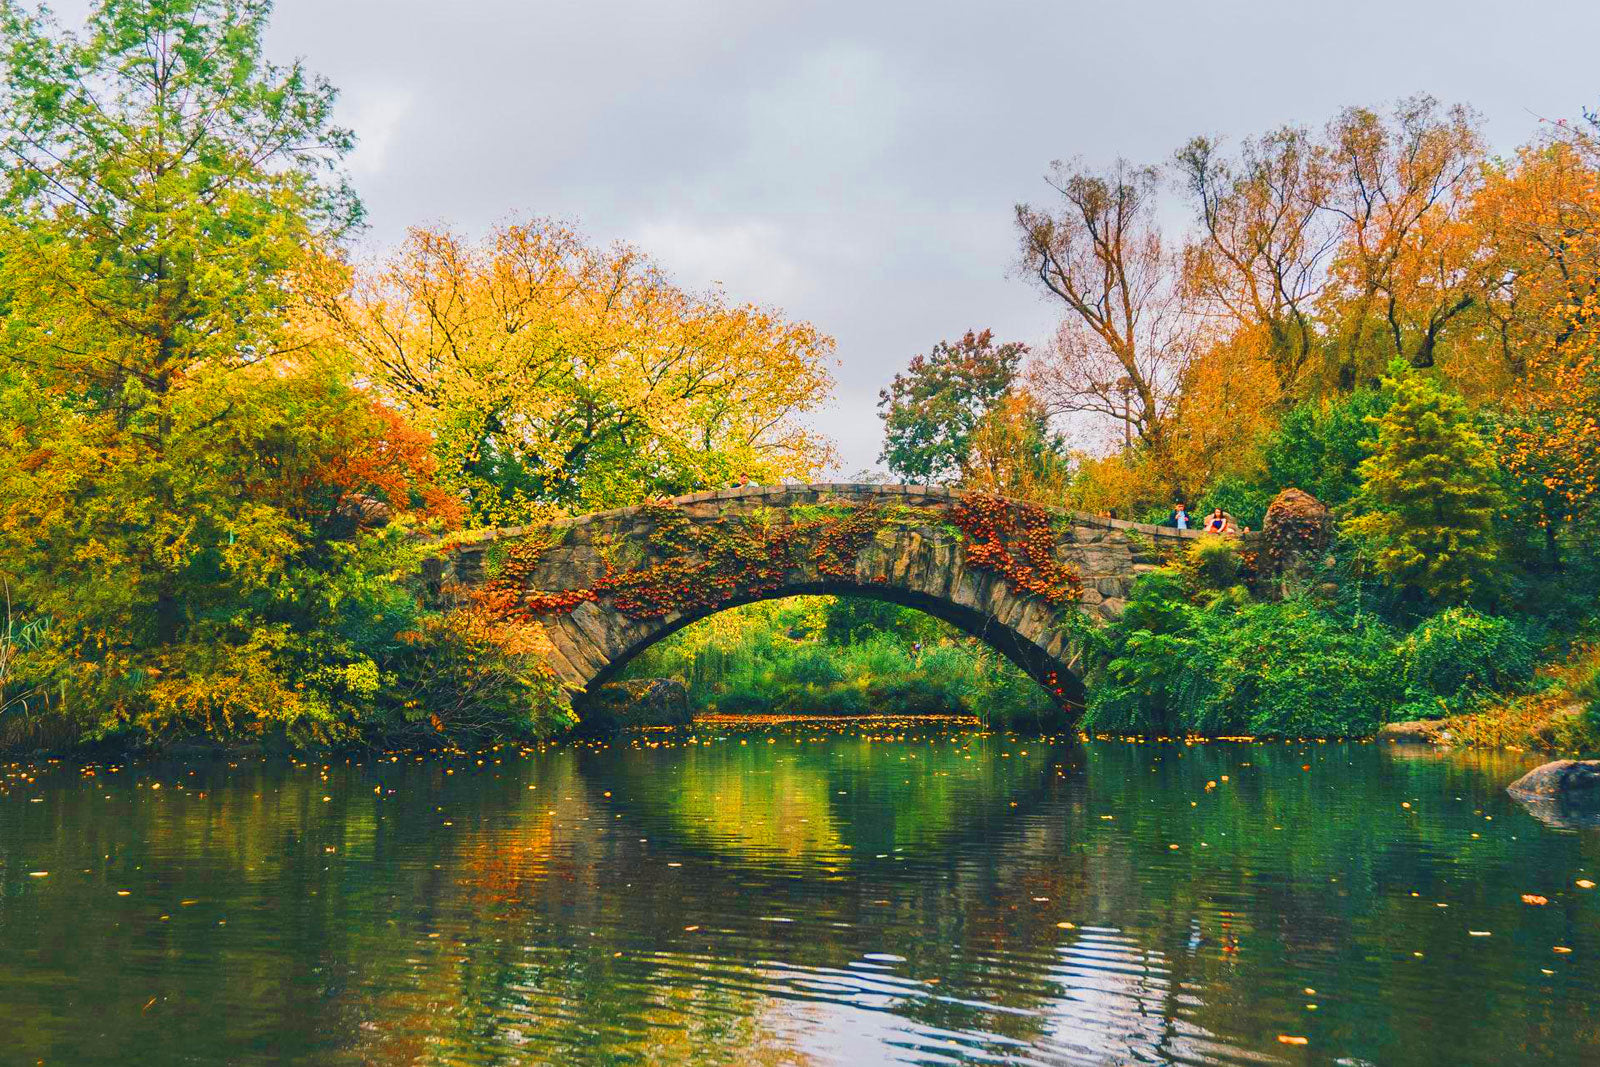 A Tourist’s Guide to Gapstow Bridge in Central Park